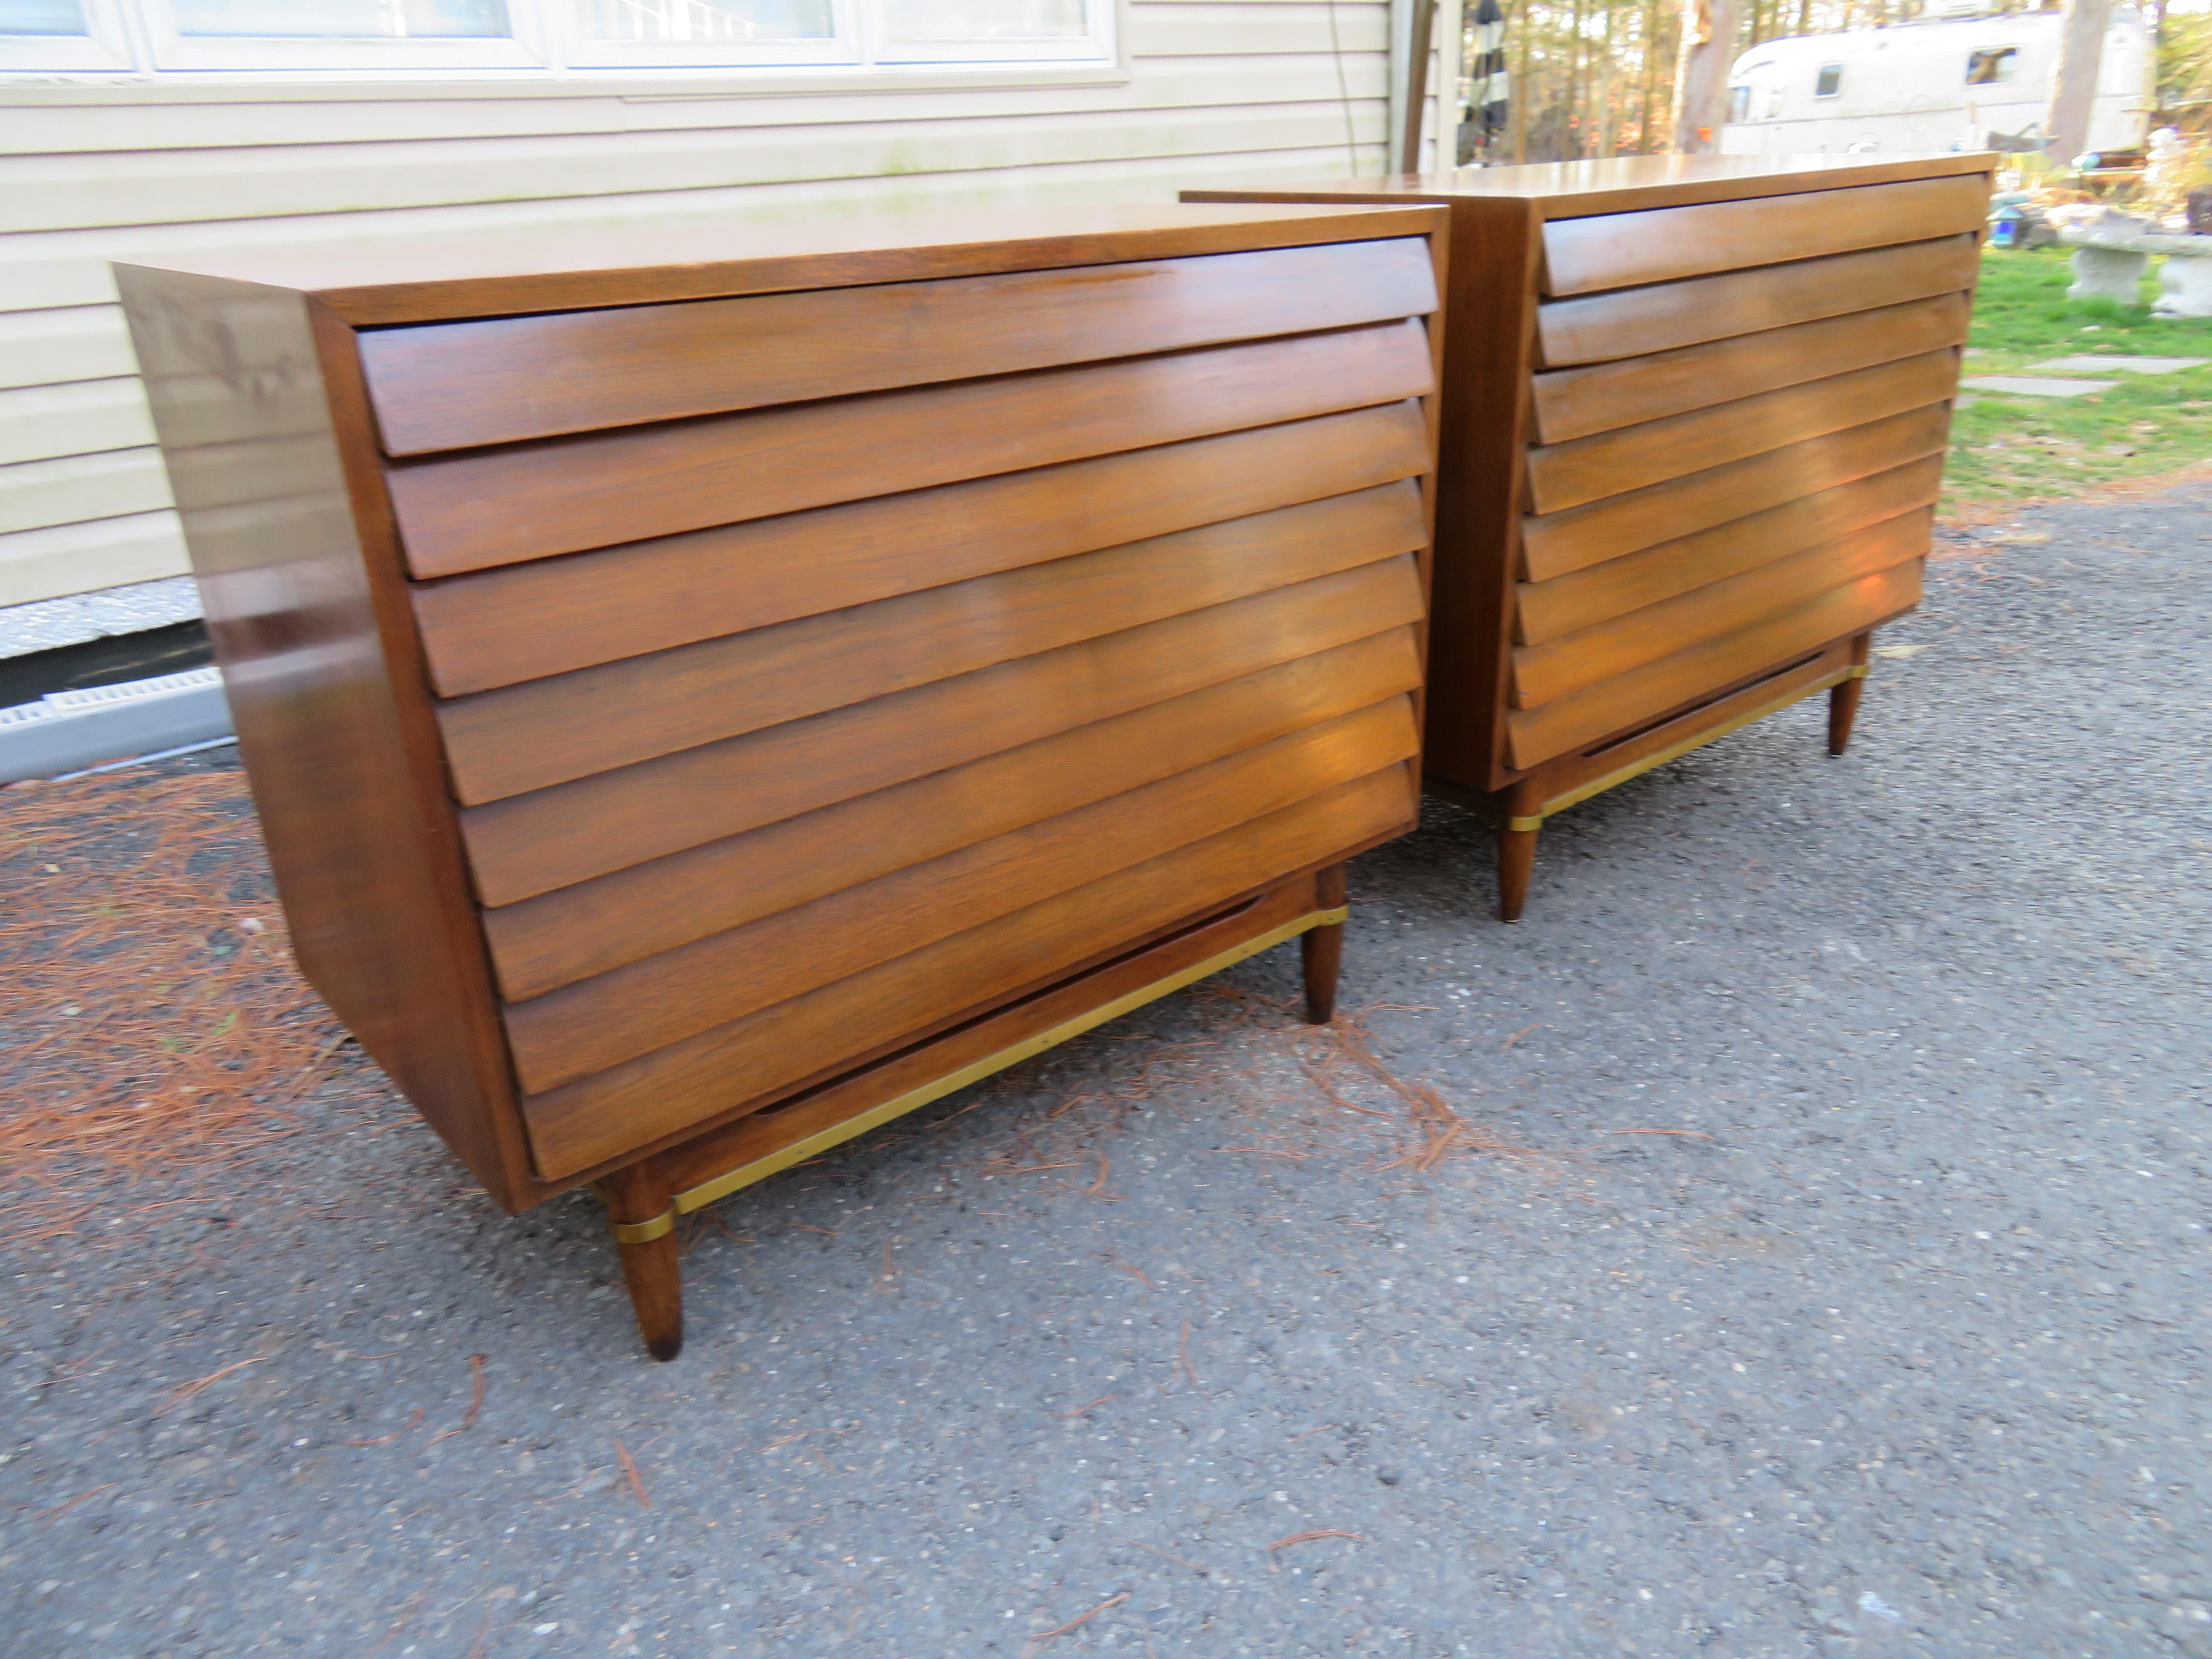 Stunning pair of American of Martinsville louvered walnut bachelor’s chests. We love the stylish louvered drawer fronts and handsome brass banding along the base. These wonderful chests measure 30